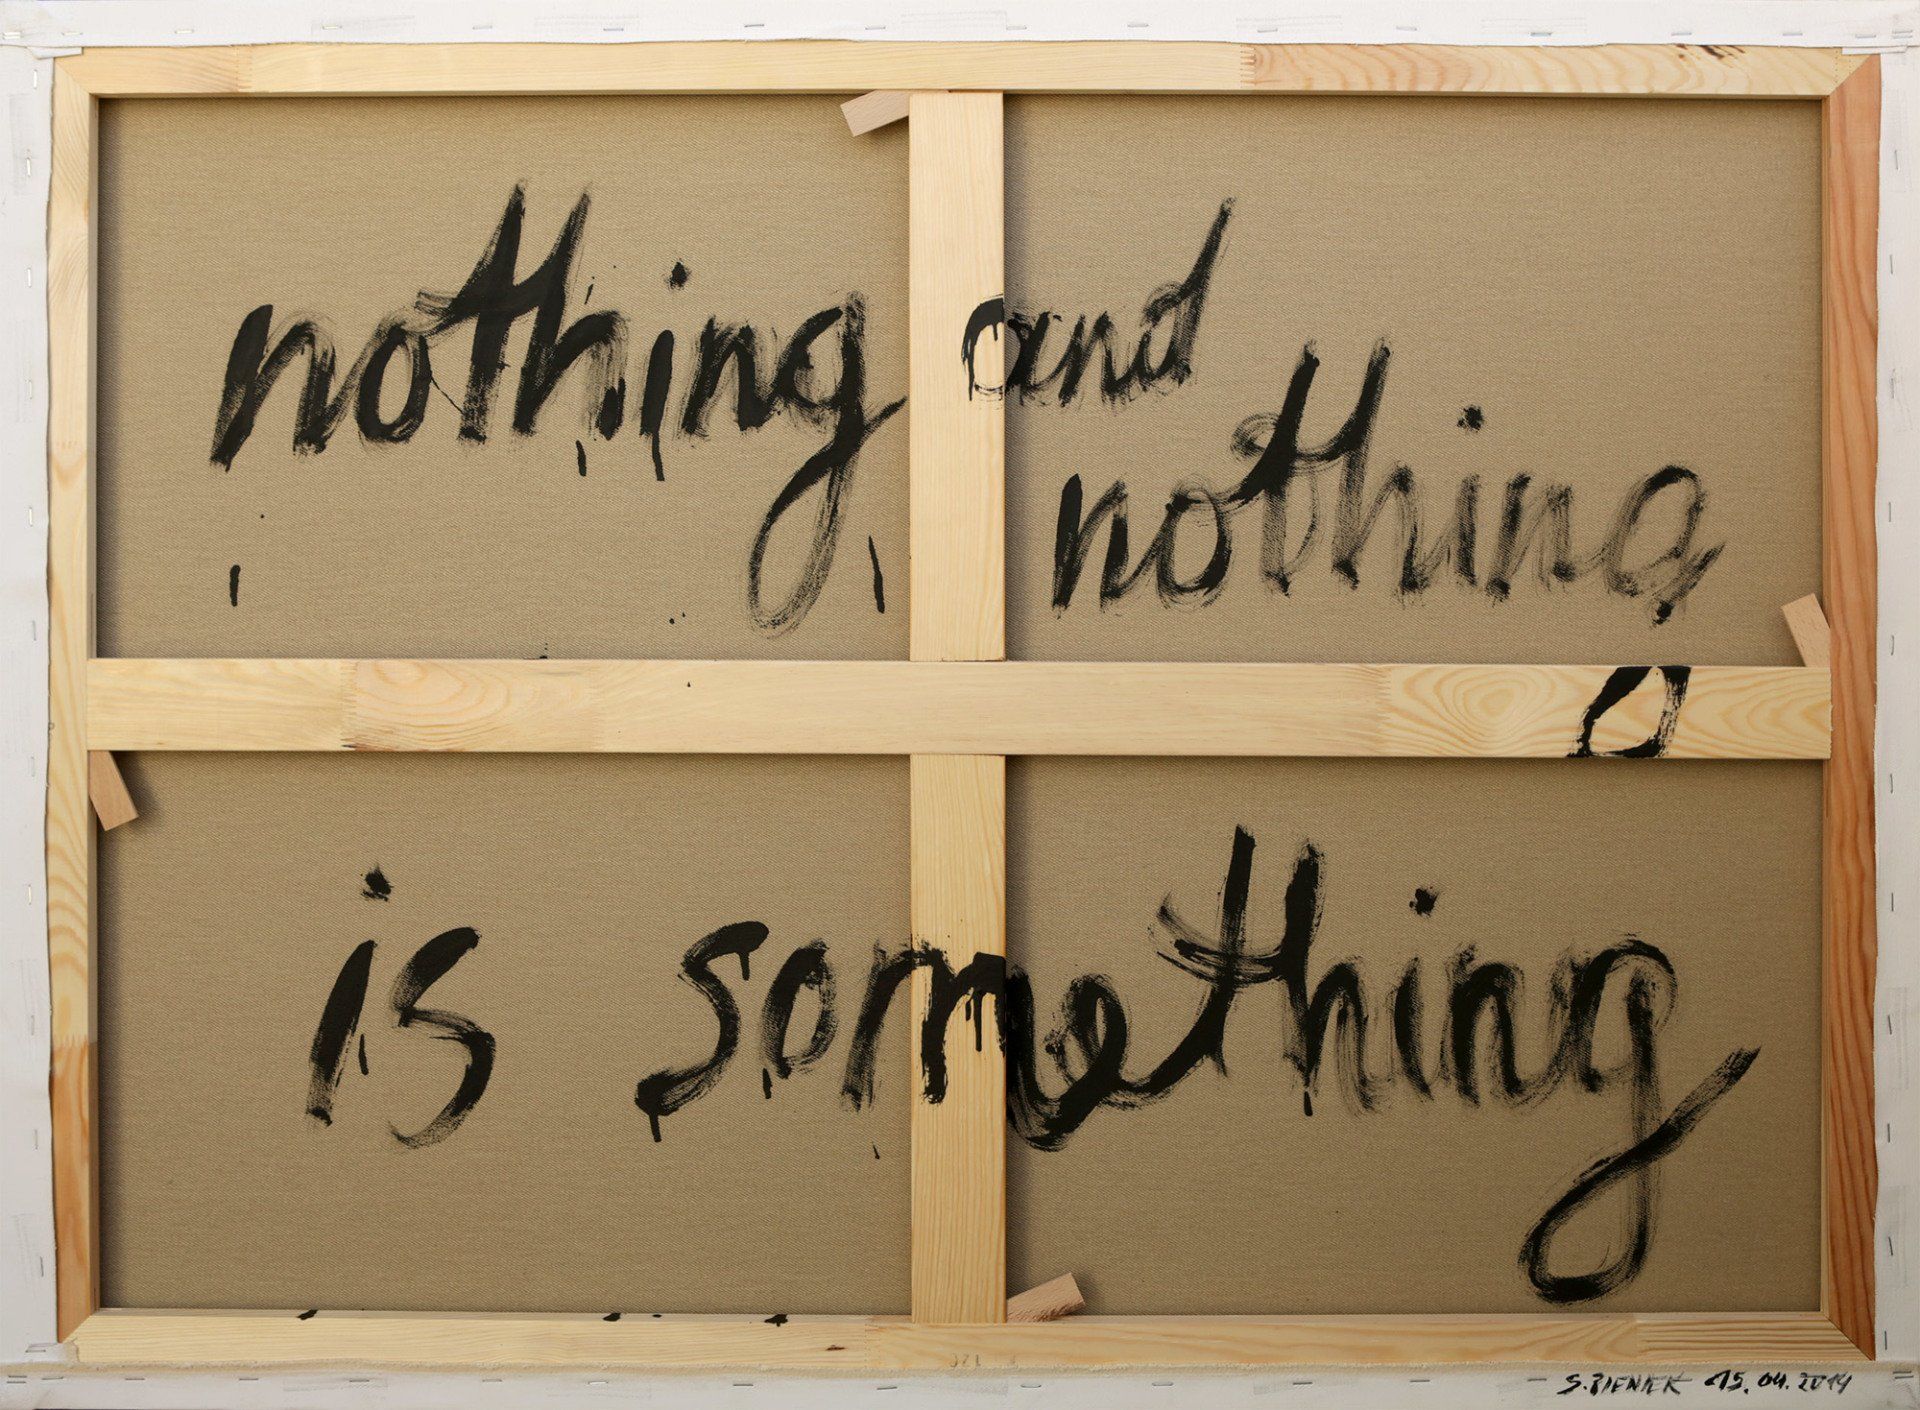 „Nothing changes nothing“ by Sebastian Bieniek (B1EN1EK), 2014. Oil on back of canvas. 90 cm. x 120 cm. From the oeuvre of Bieniek-Text and part of the 